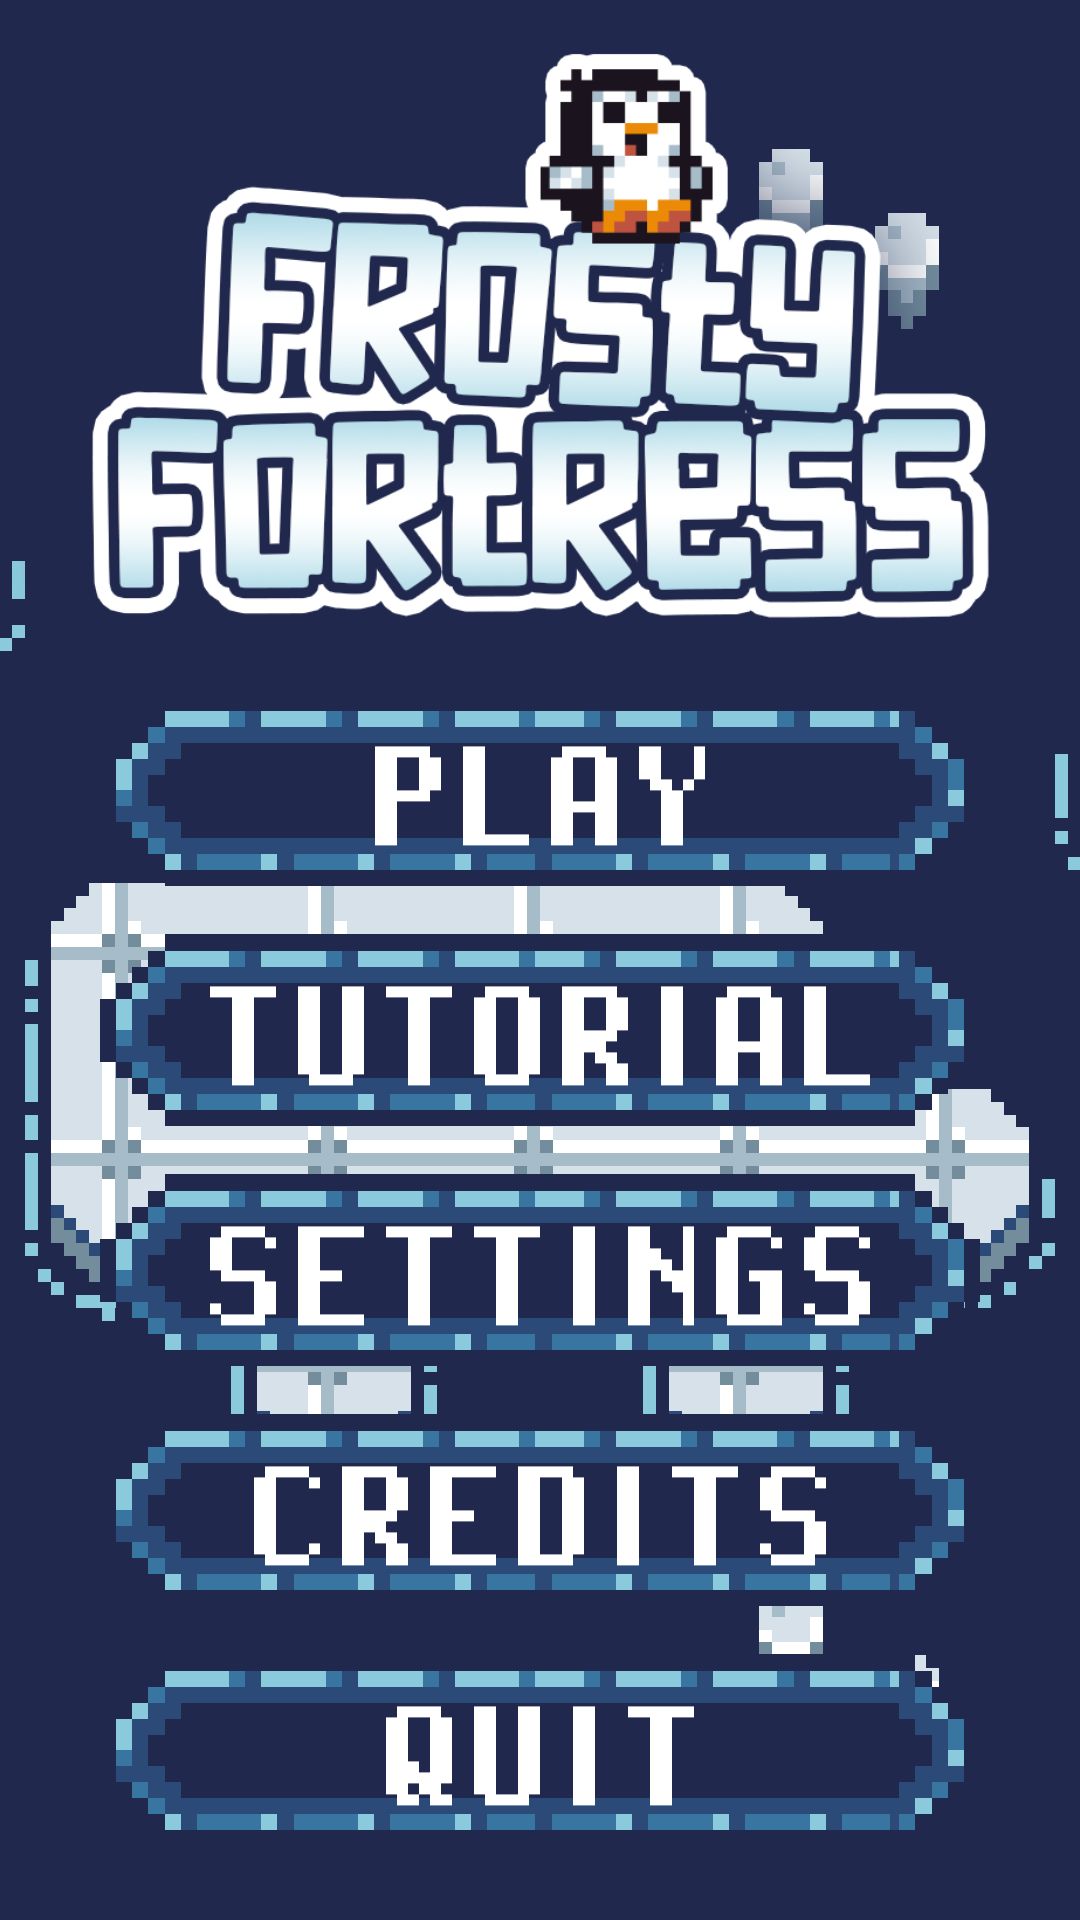 Baixar Frosty Fortress para Android grátis.